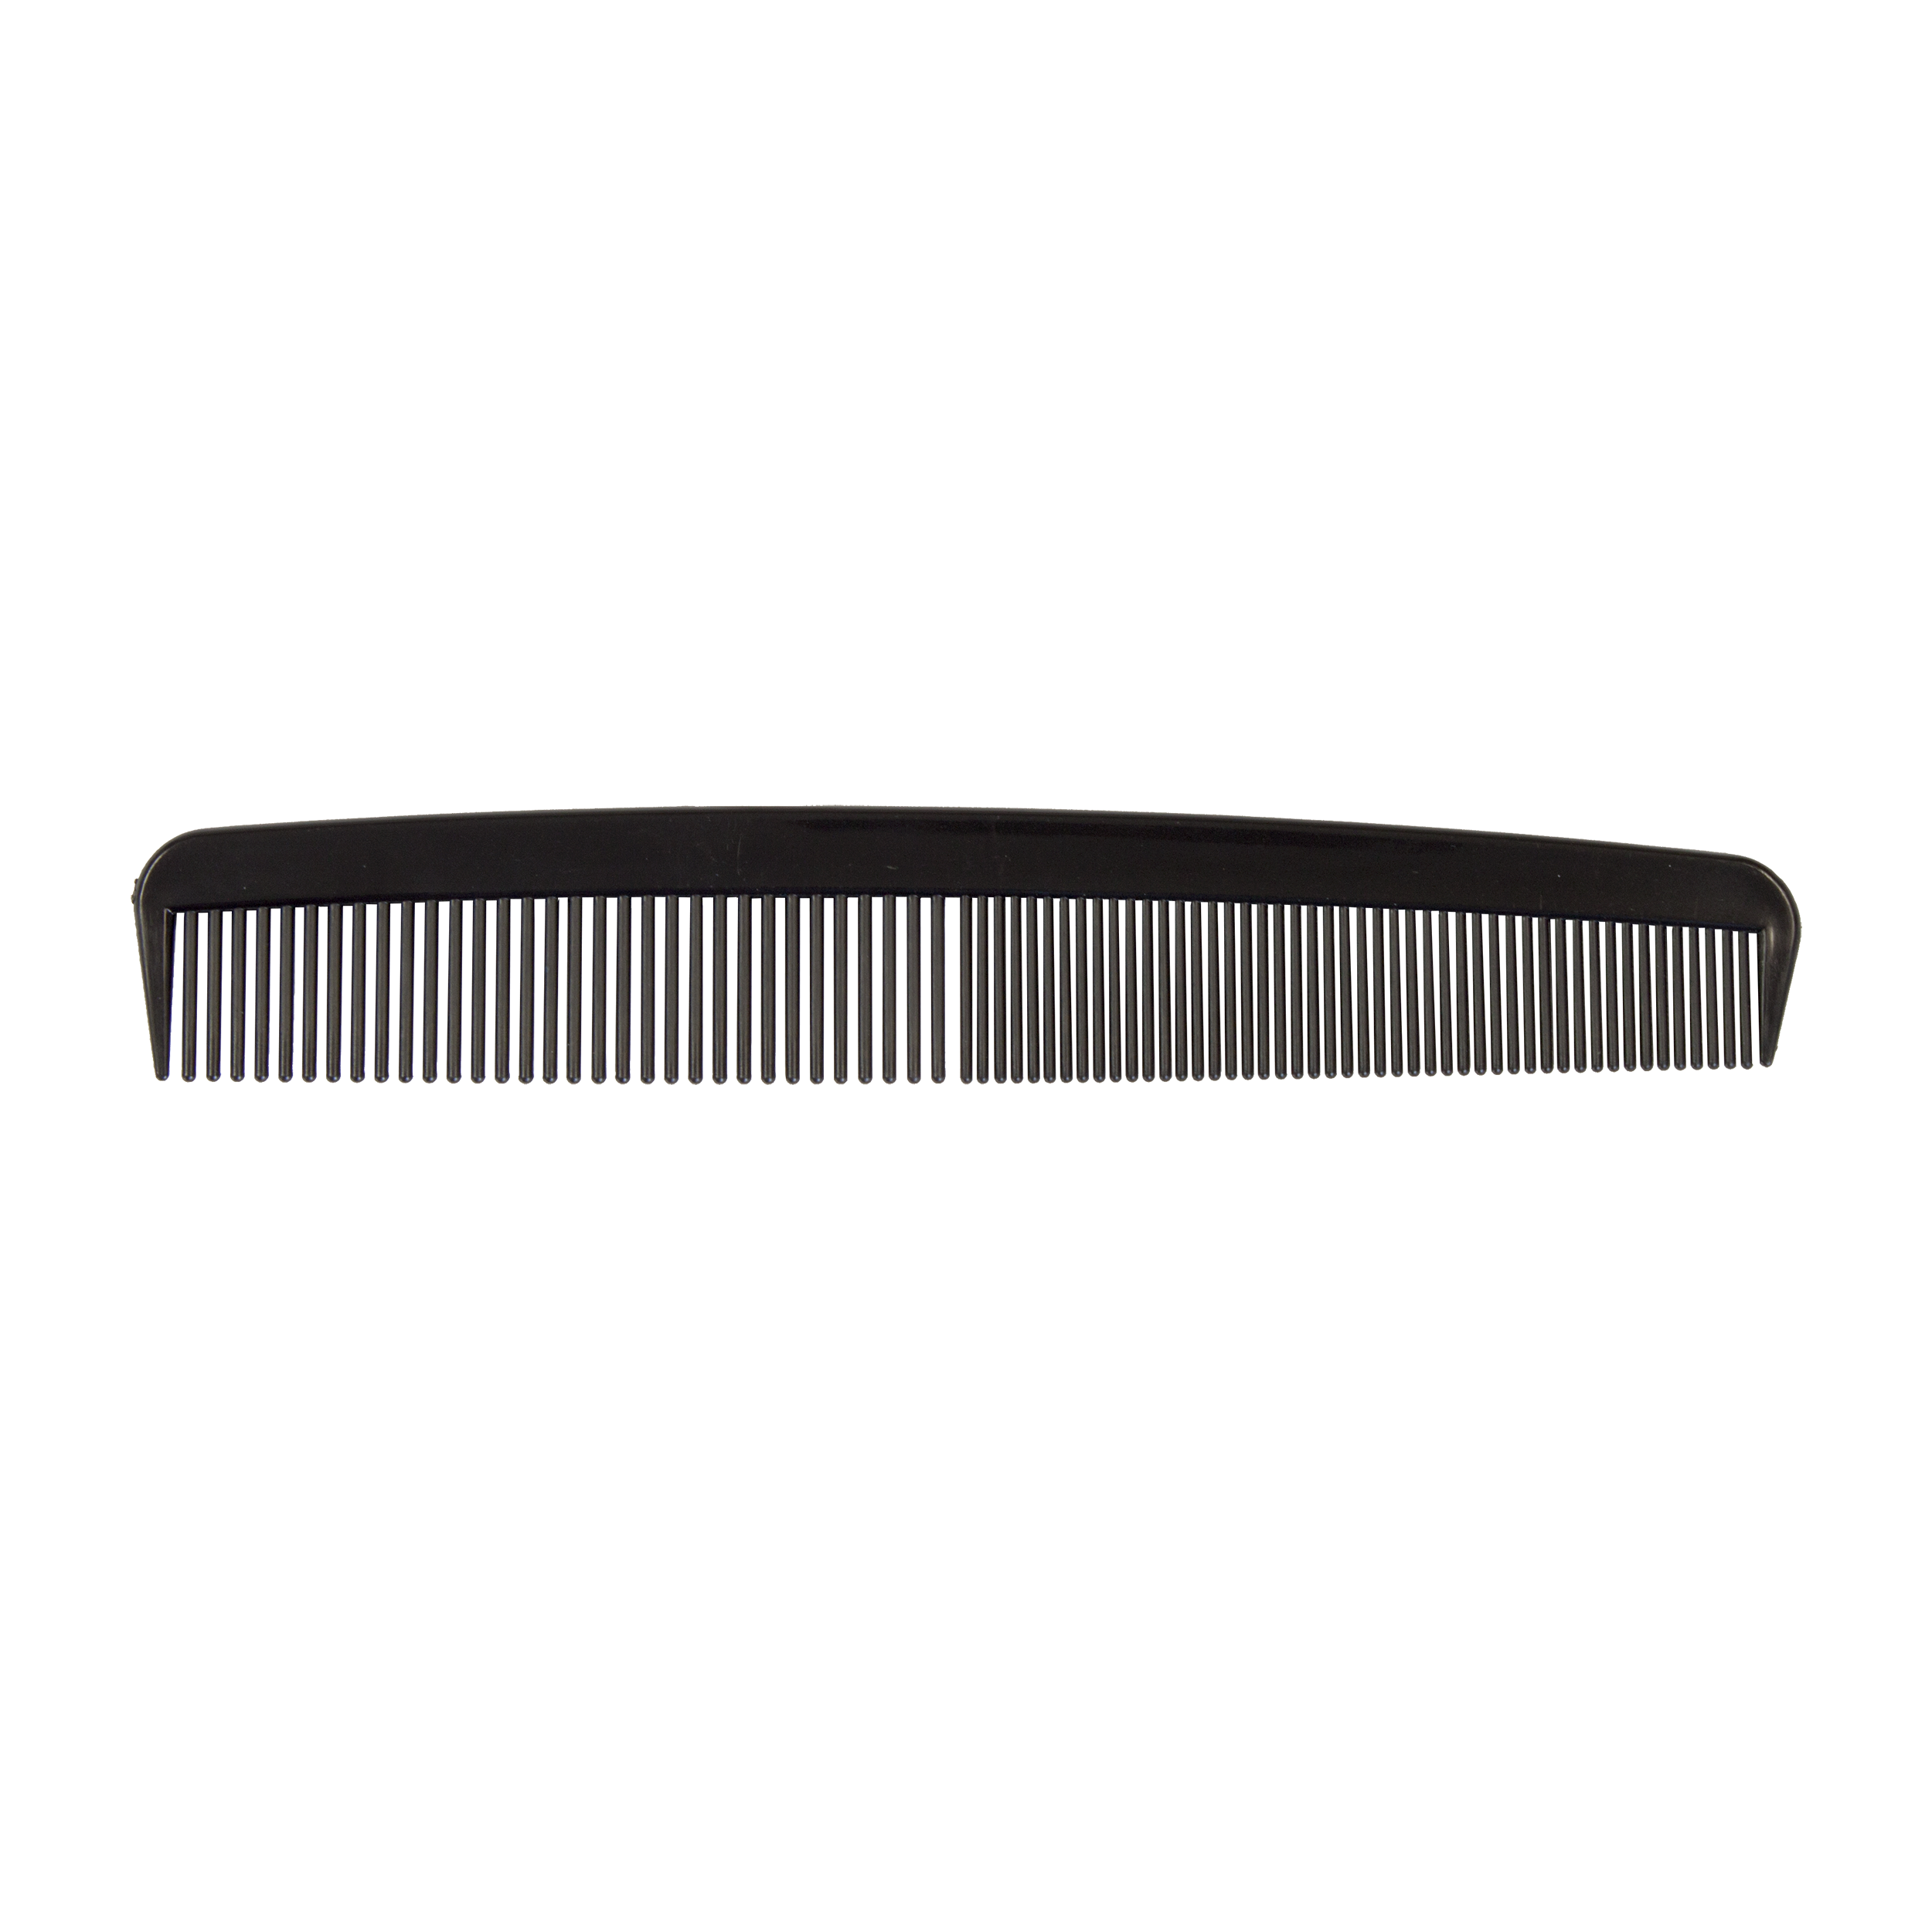 Adult Combs 7in - Black